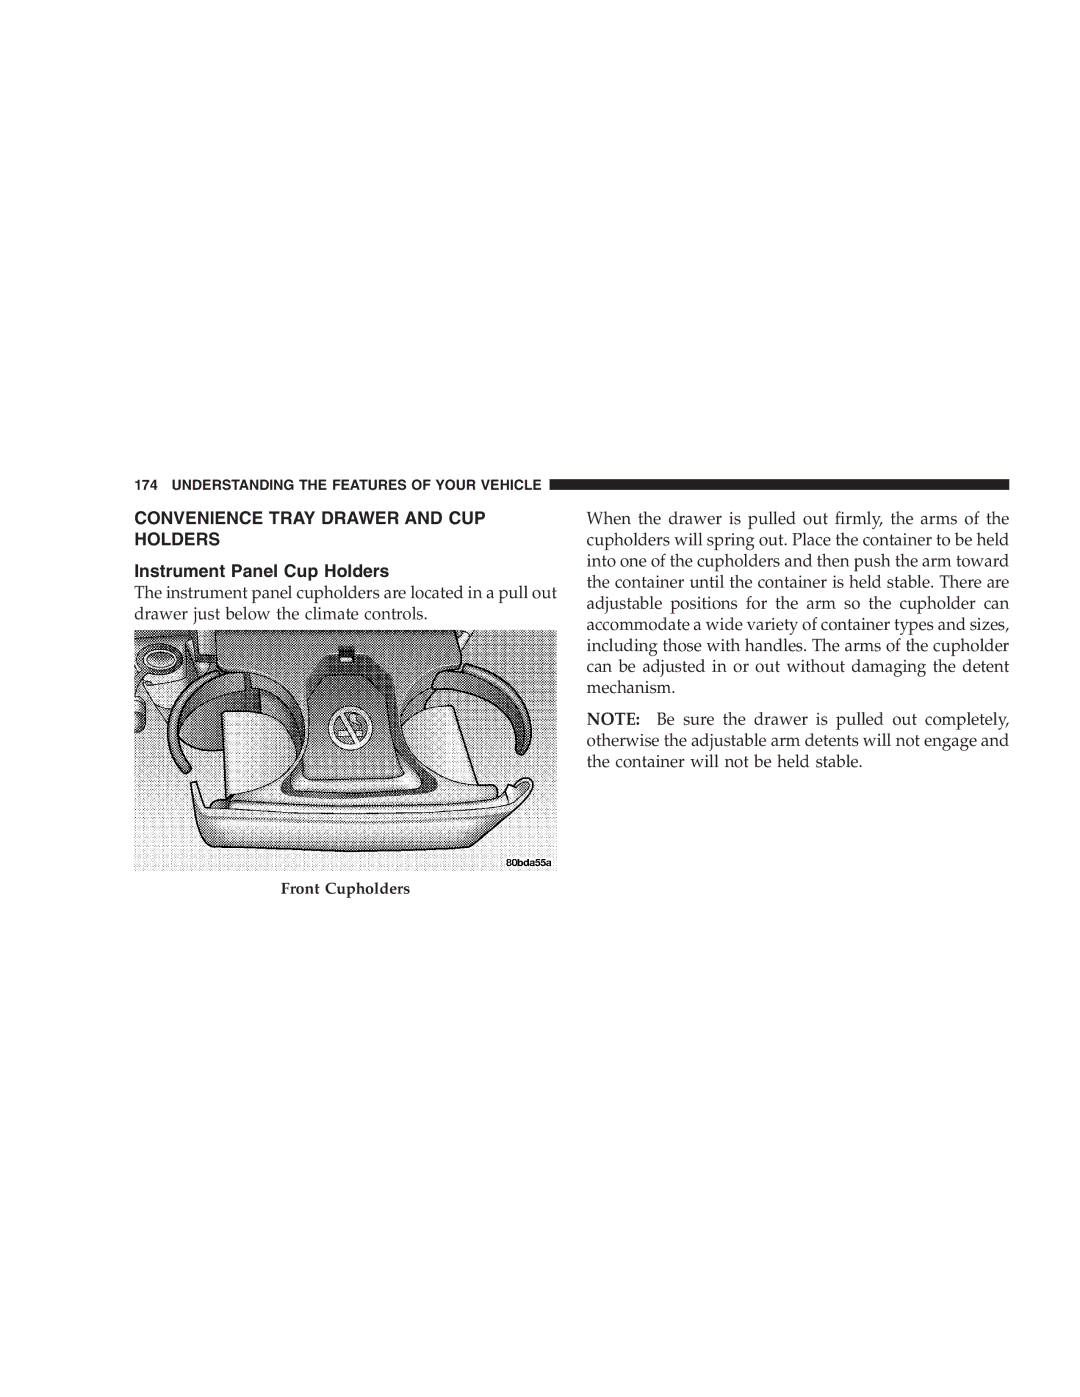 Chrysler 2005 Town and Country manual Convenience Tray Drawer and CUP Holders, Instrument Panel Cup Holders 